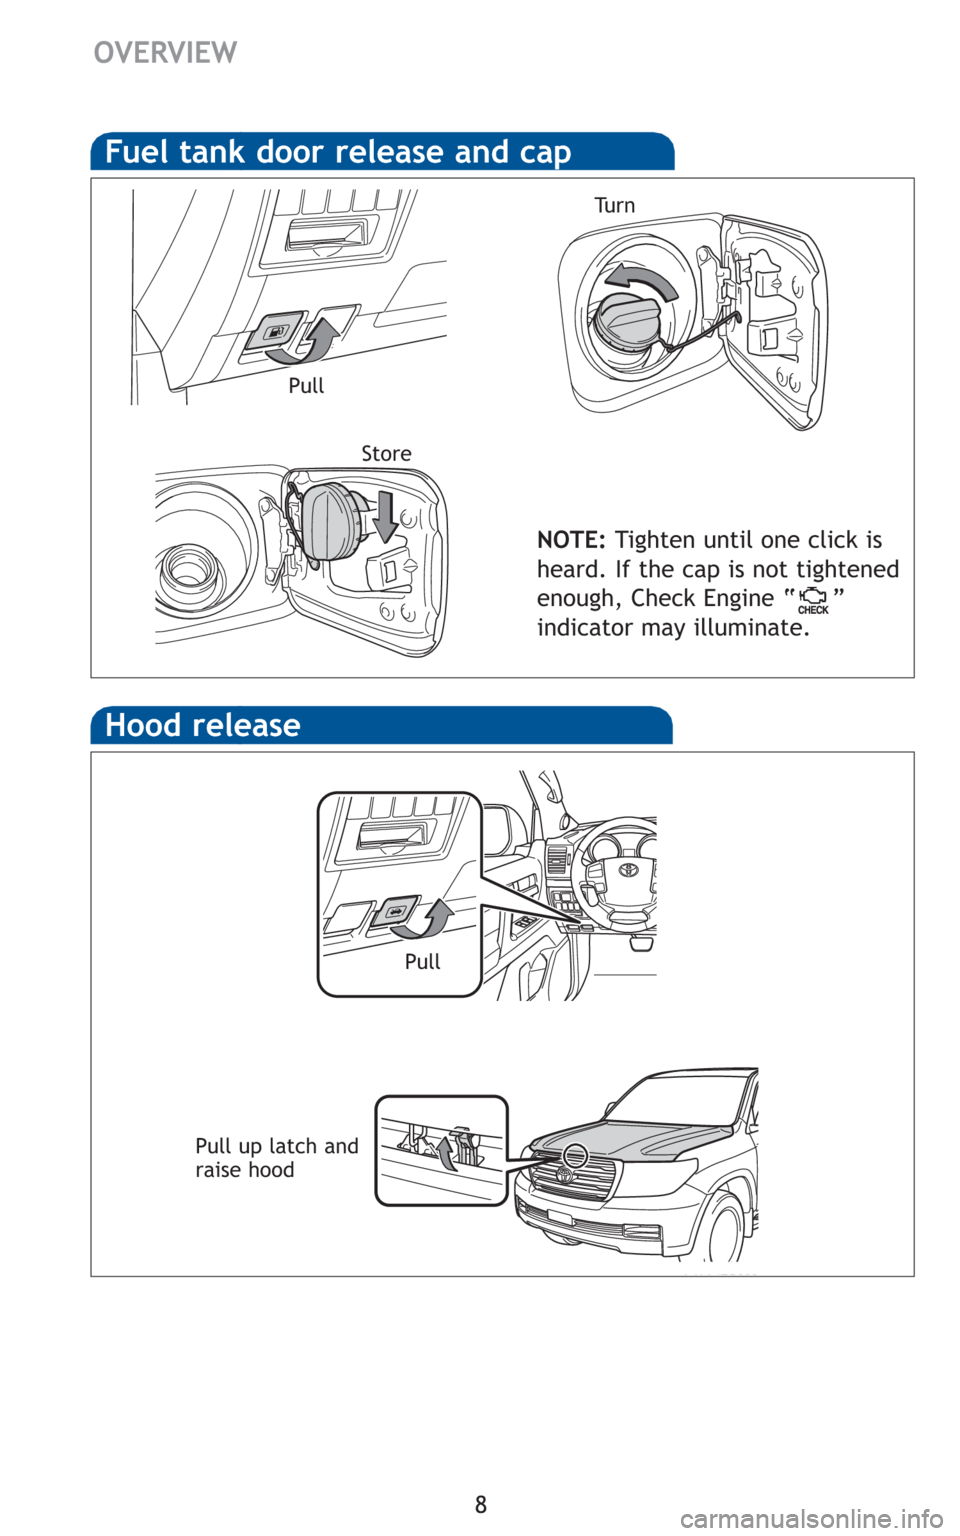 TOYOTA LAND CRUISER 2010 J200 Quick Reference Guide 8
Hood release
Pull up latch and
raise hood
Fuel tank door release and cap
NOTE:Tighten until one click is
heard. If the cap is not tightened
enough, Check Engine “ ”
indicator may illuminate.
Pul